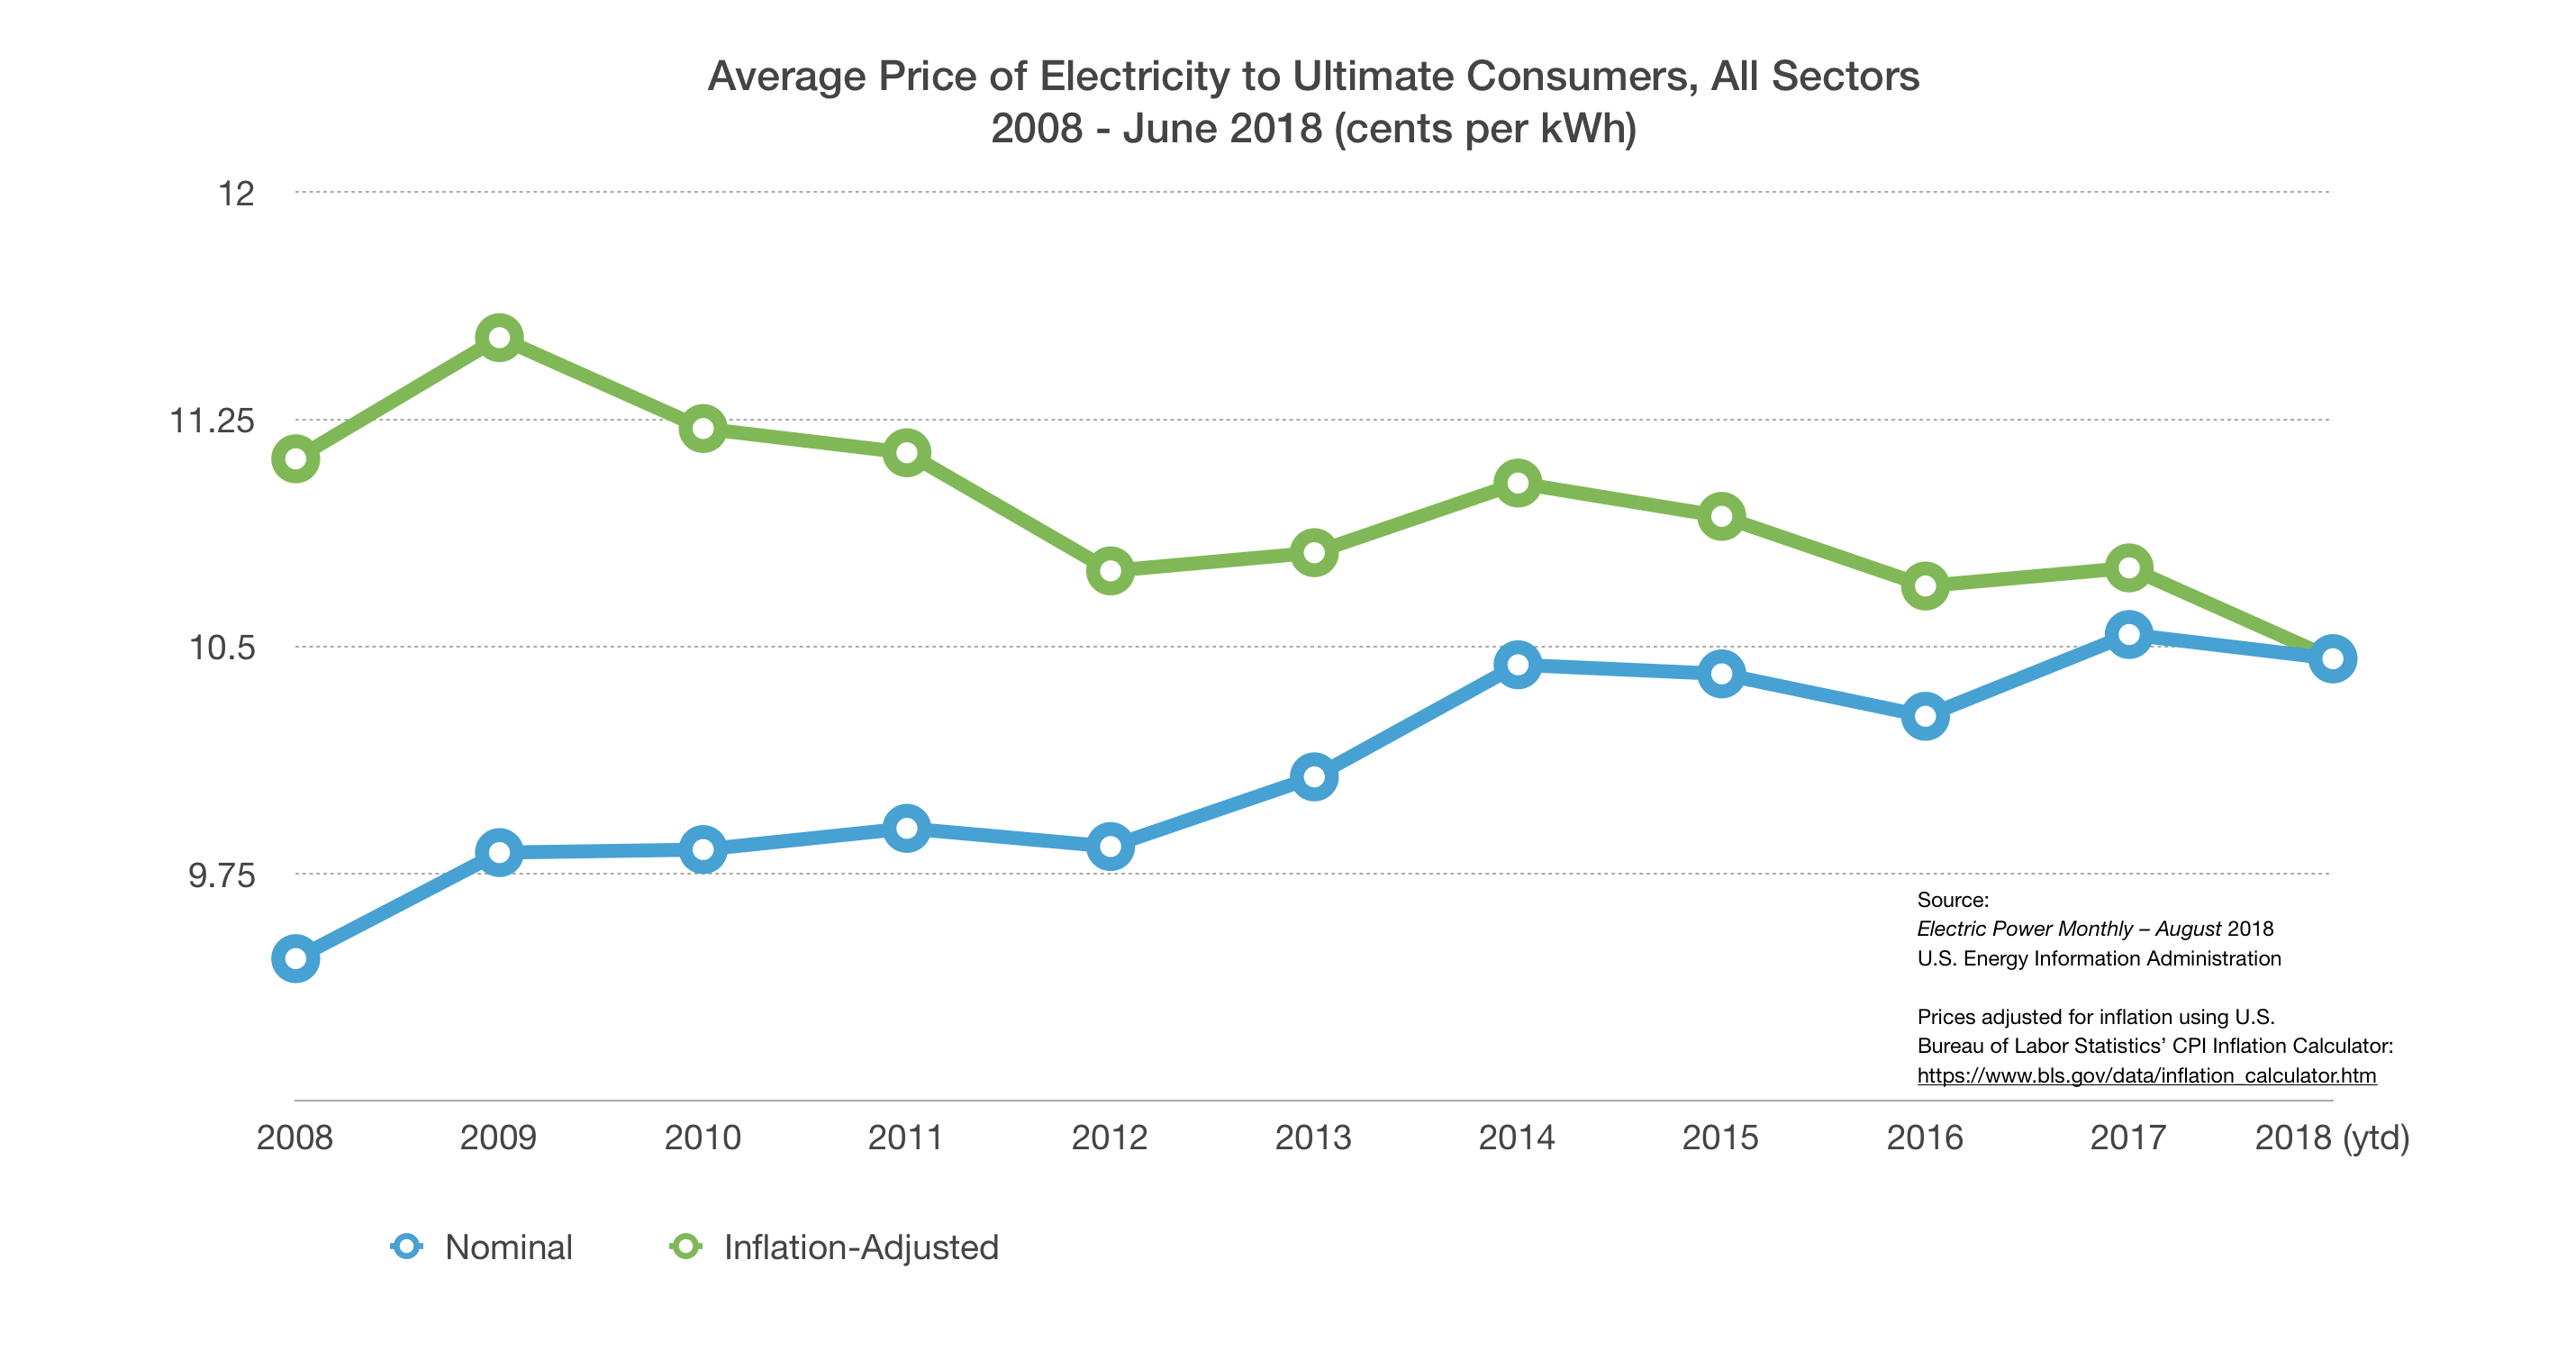 Average Price of Electricity to Ultimate Consumers, All Sectors, 2008 - June 2018 (data from EIA)